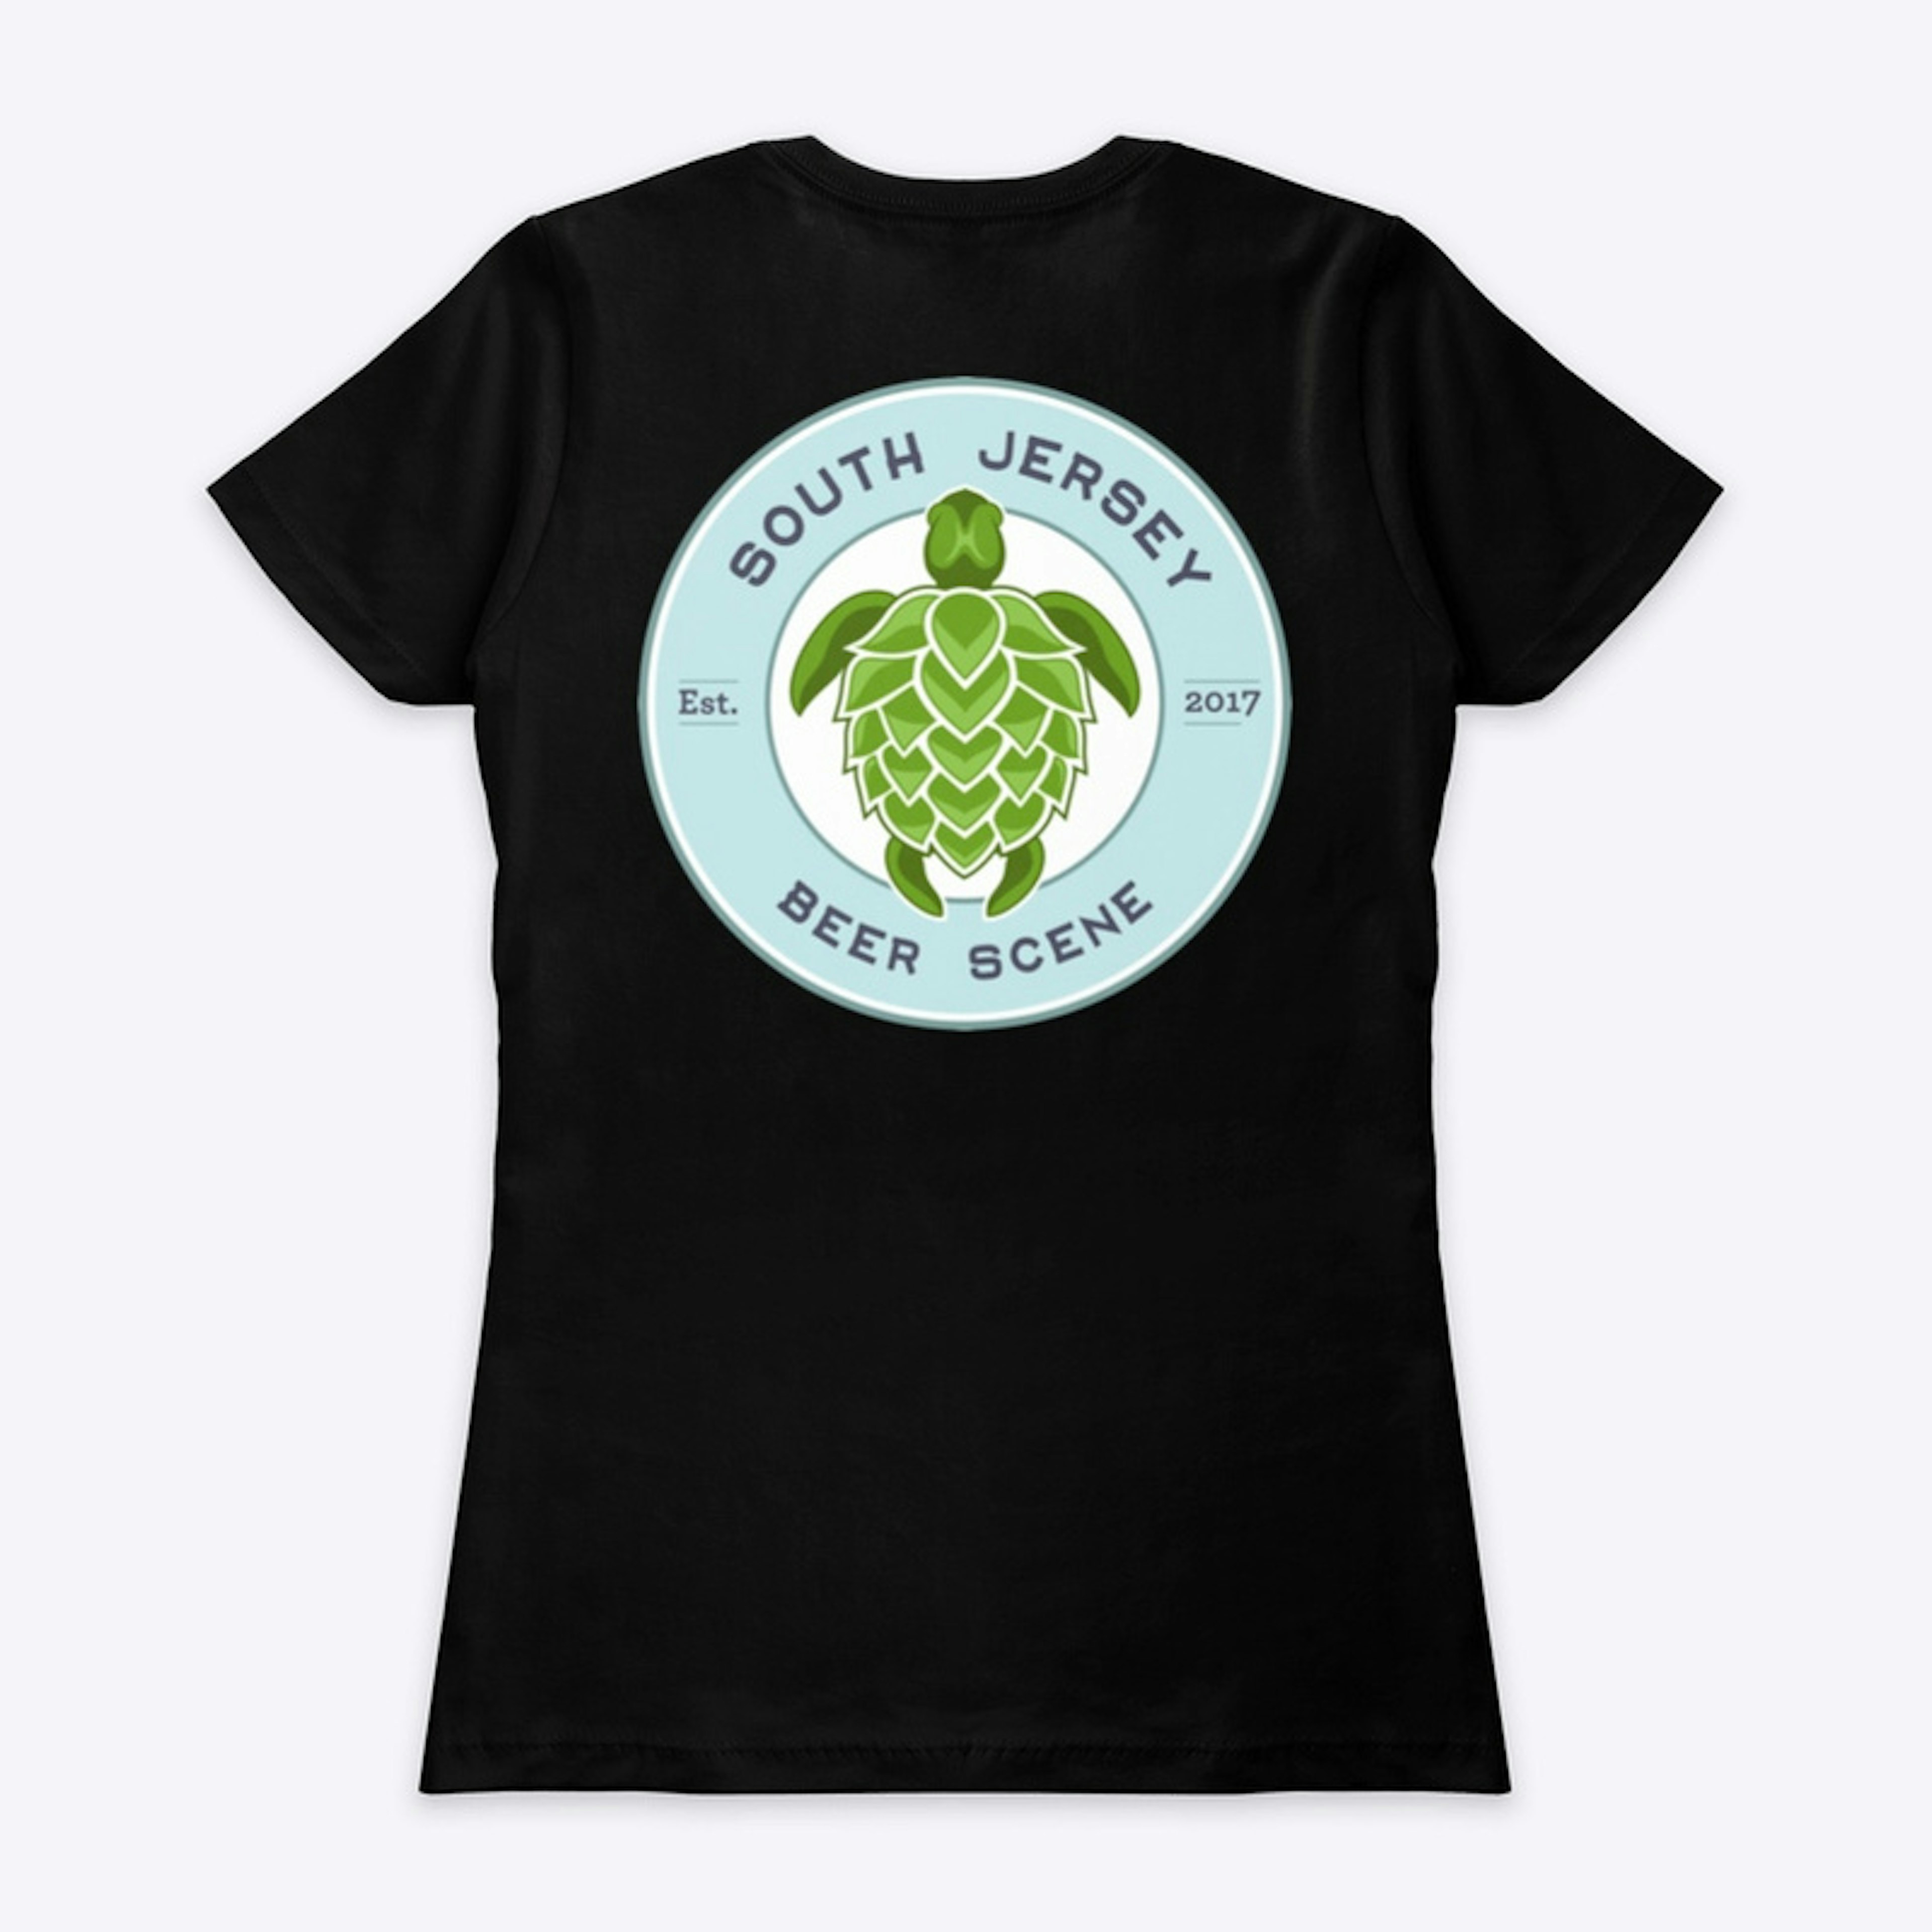 We Are South Jersey Beer Scene T-Shirt